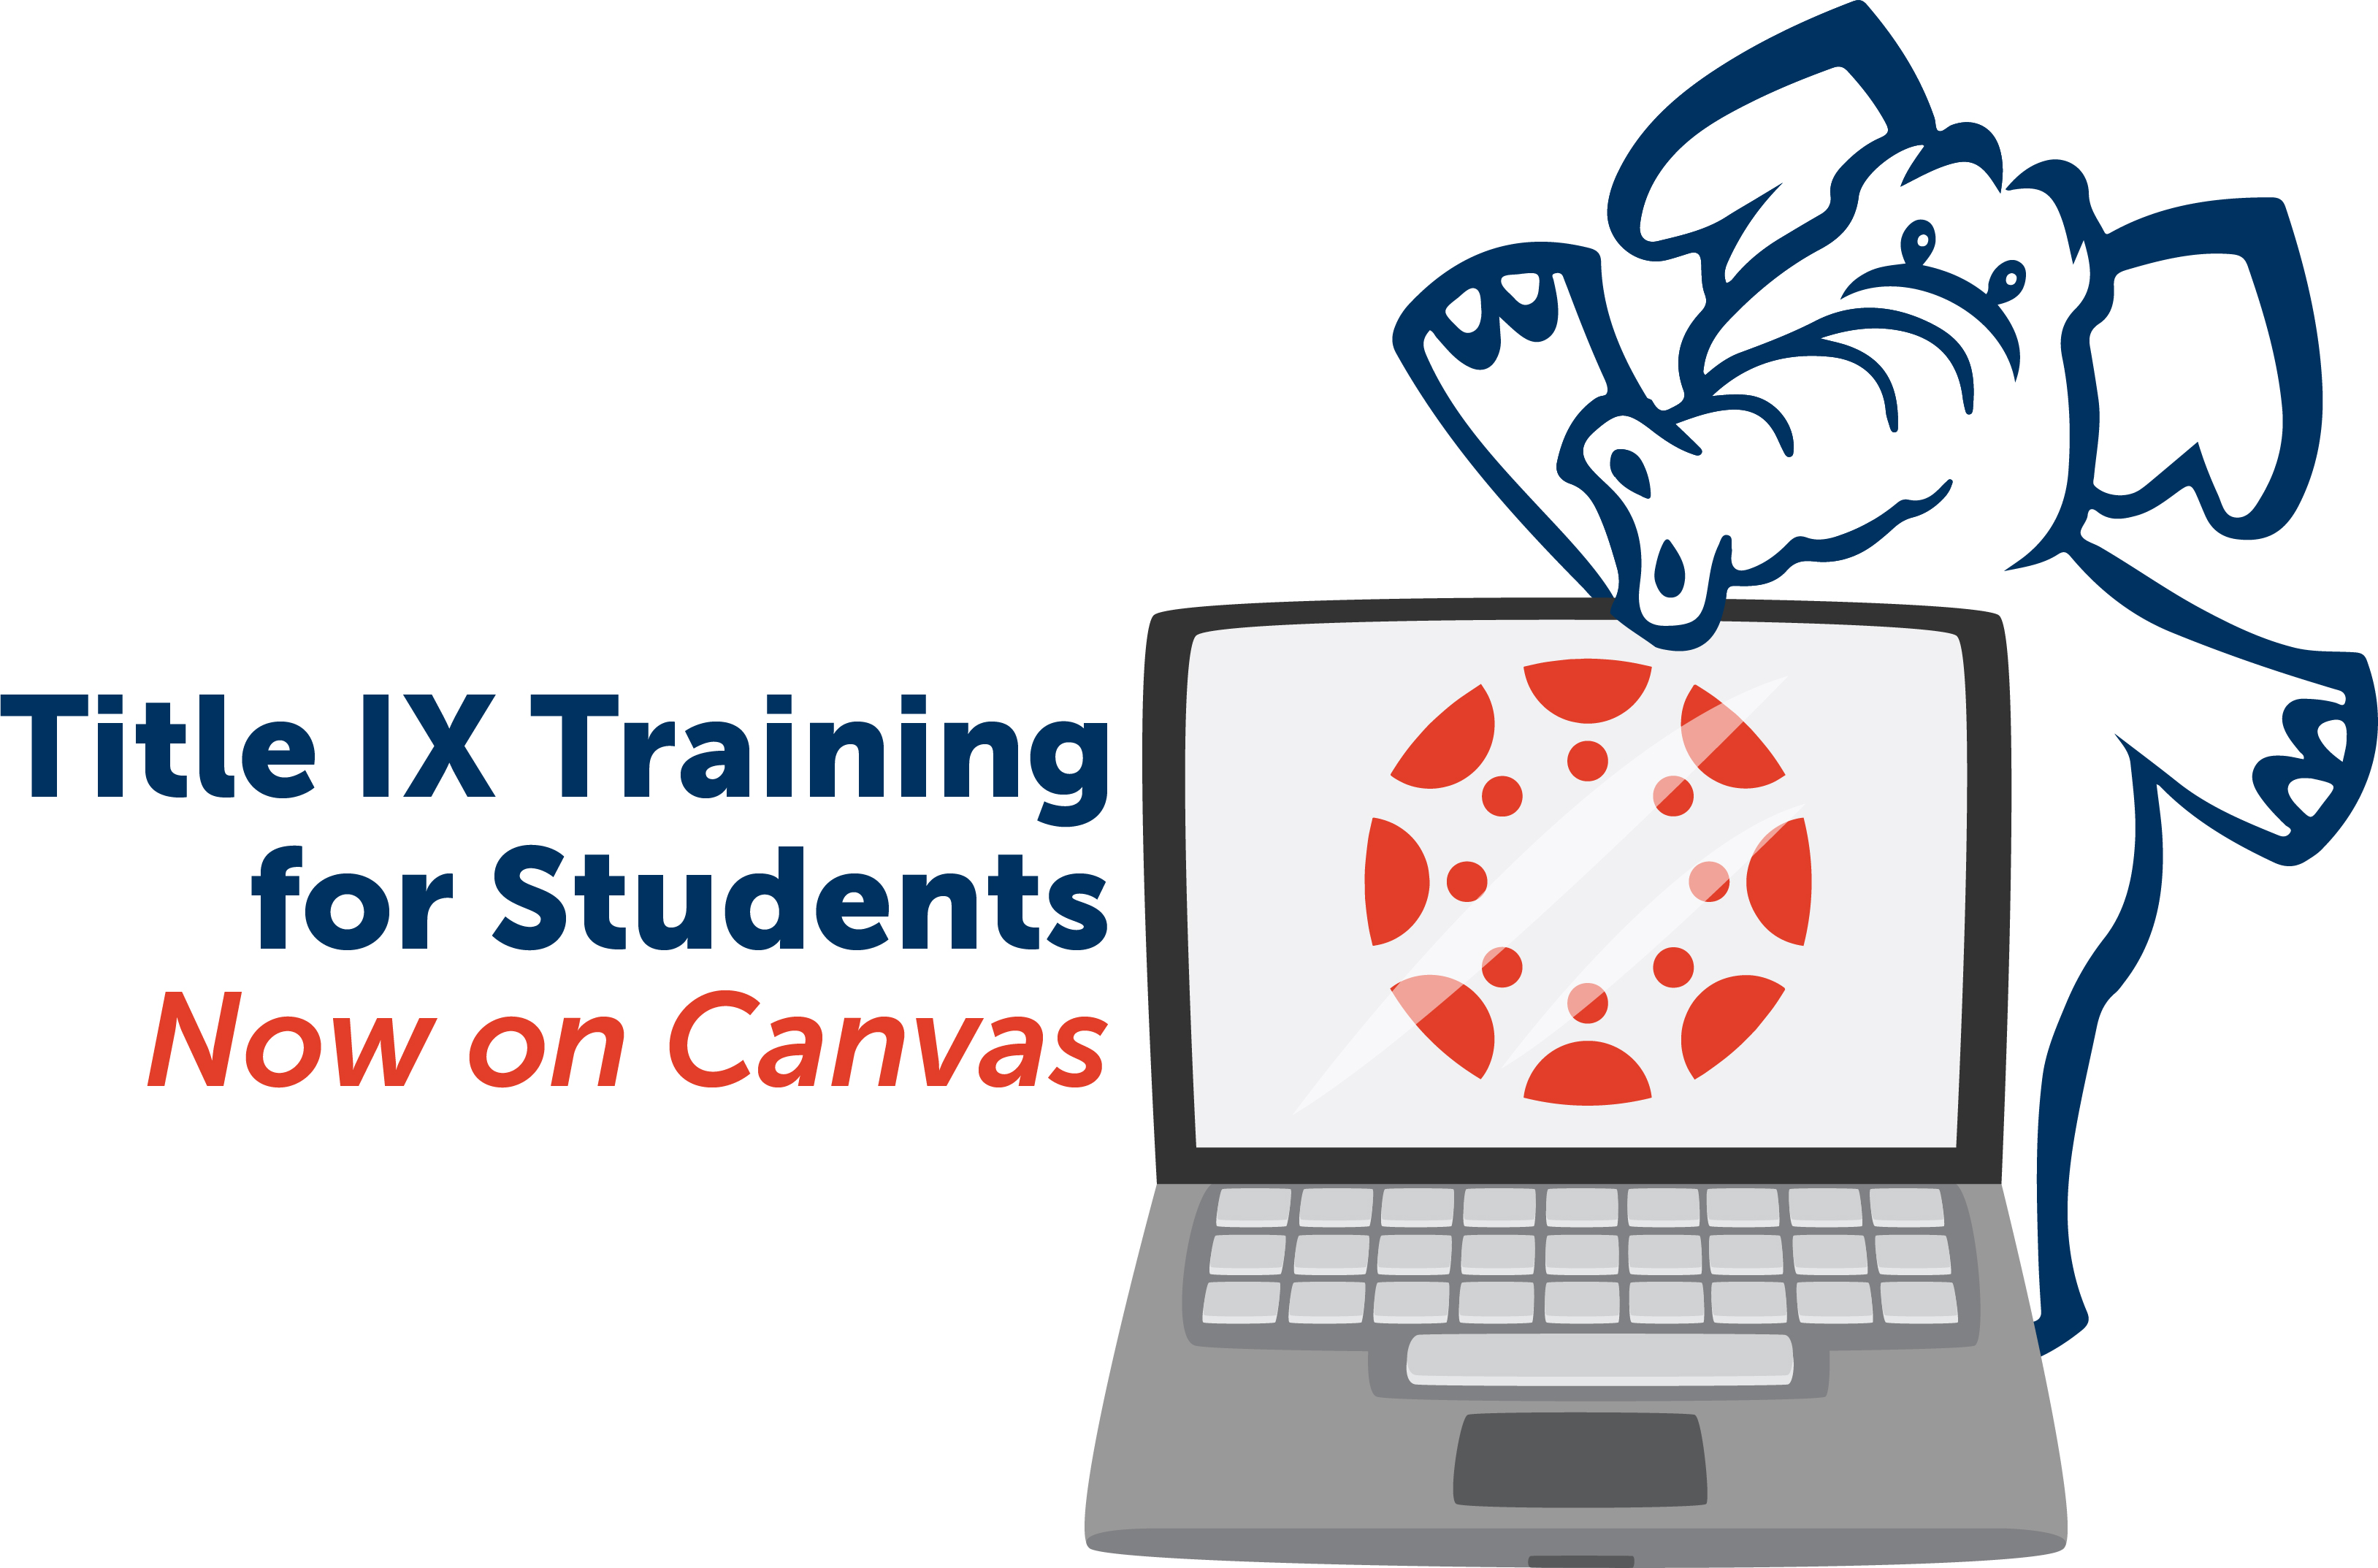 Title IX Training for Students Now on Canvas